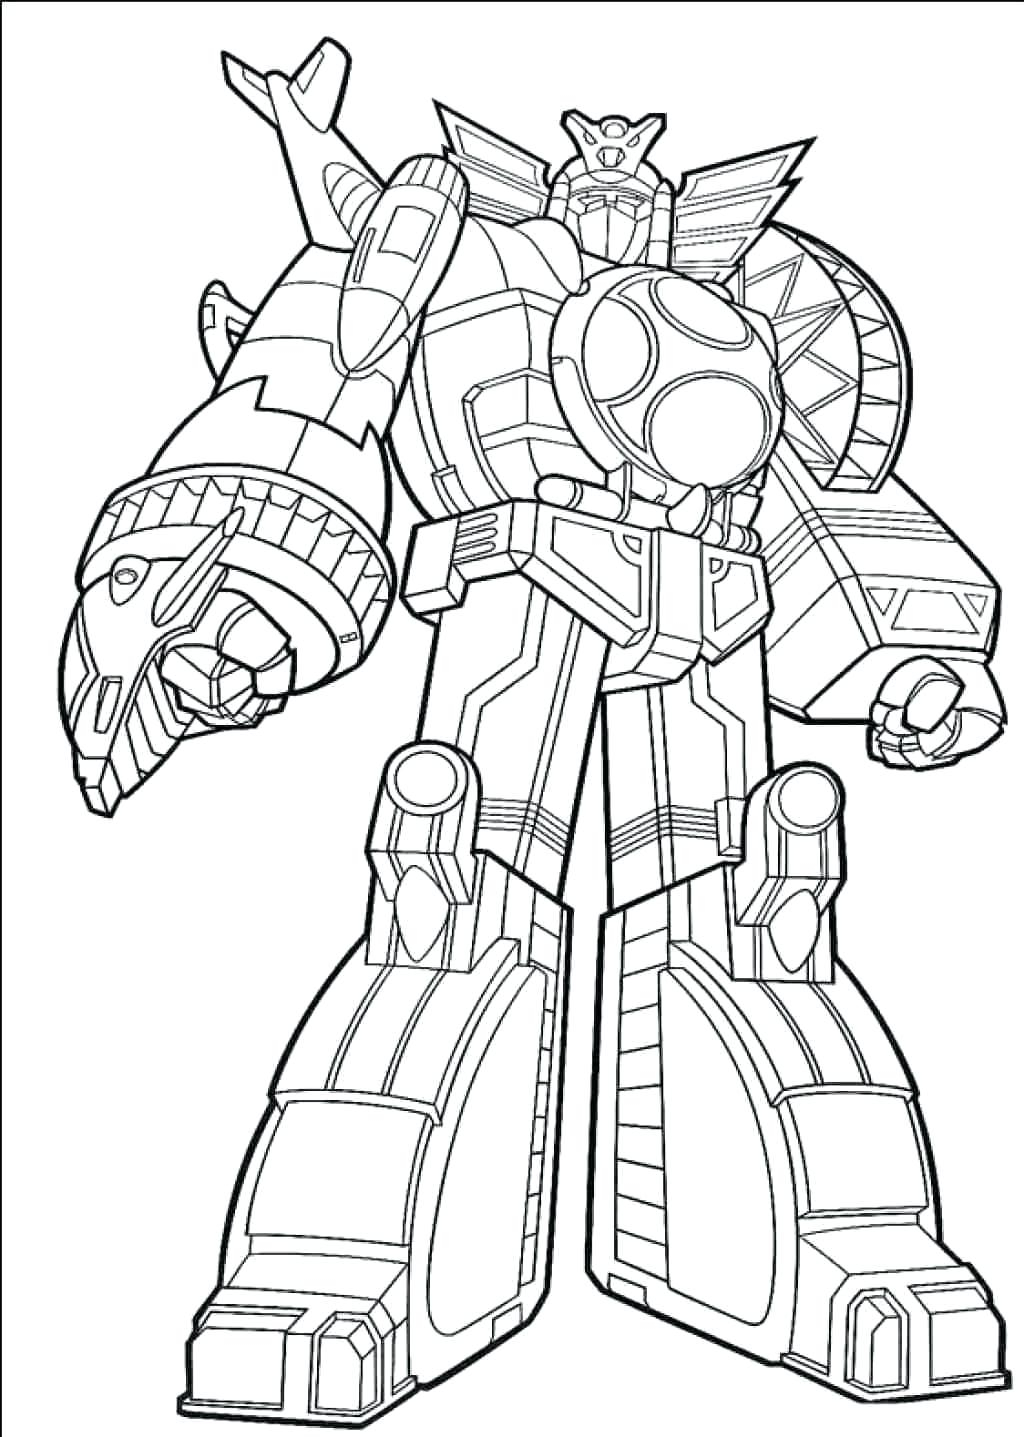 Power Ranger Coloring Pages Power Ranger Coloring Page Bitslice ...